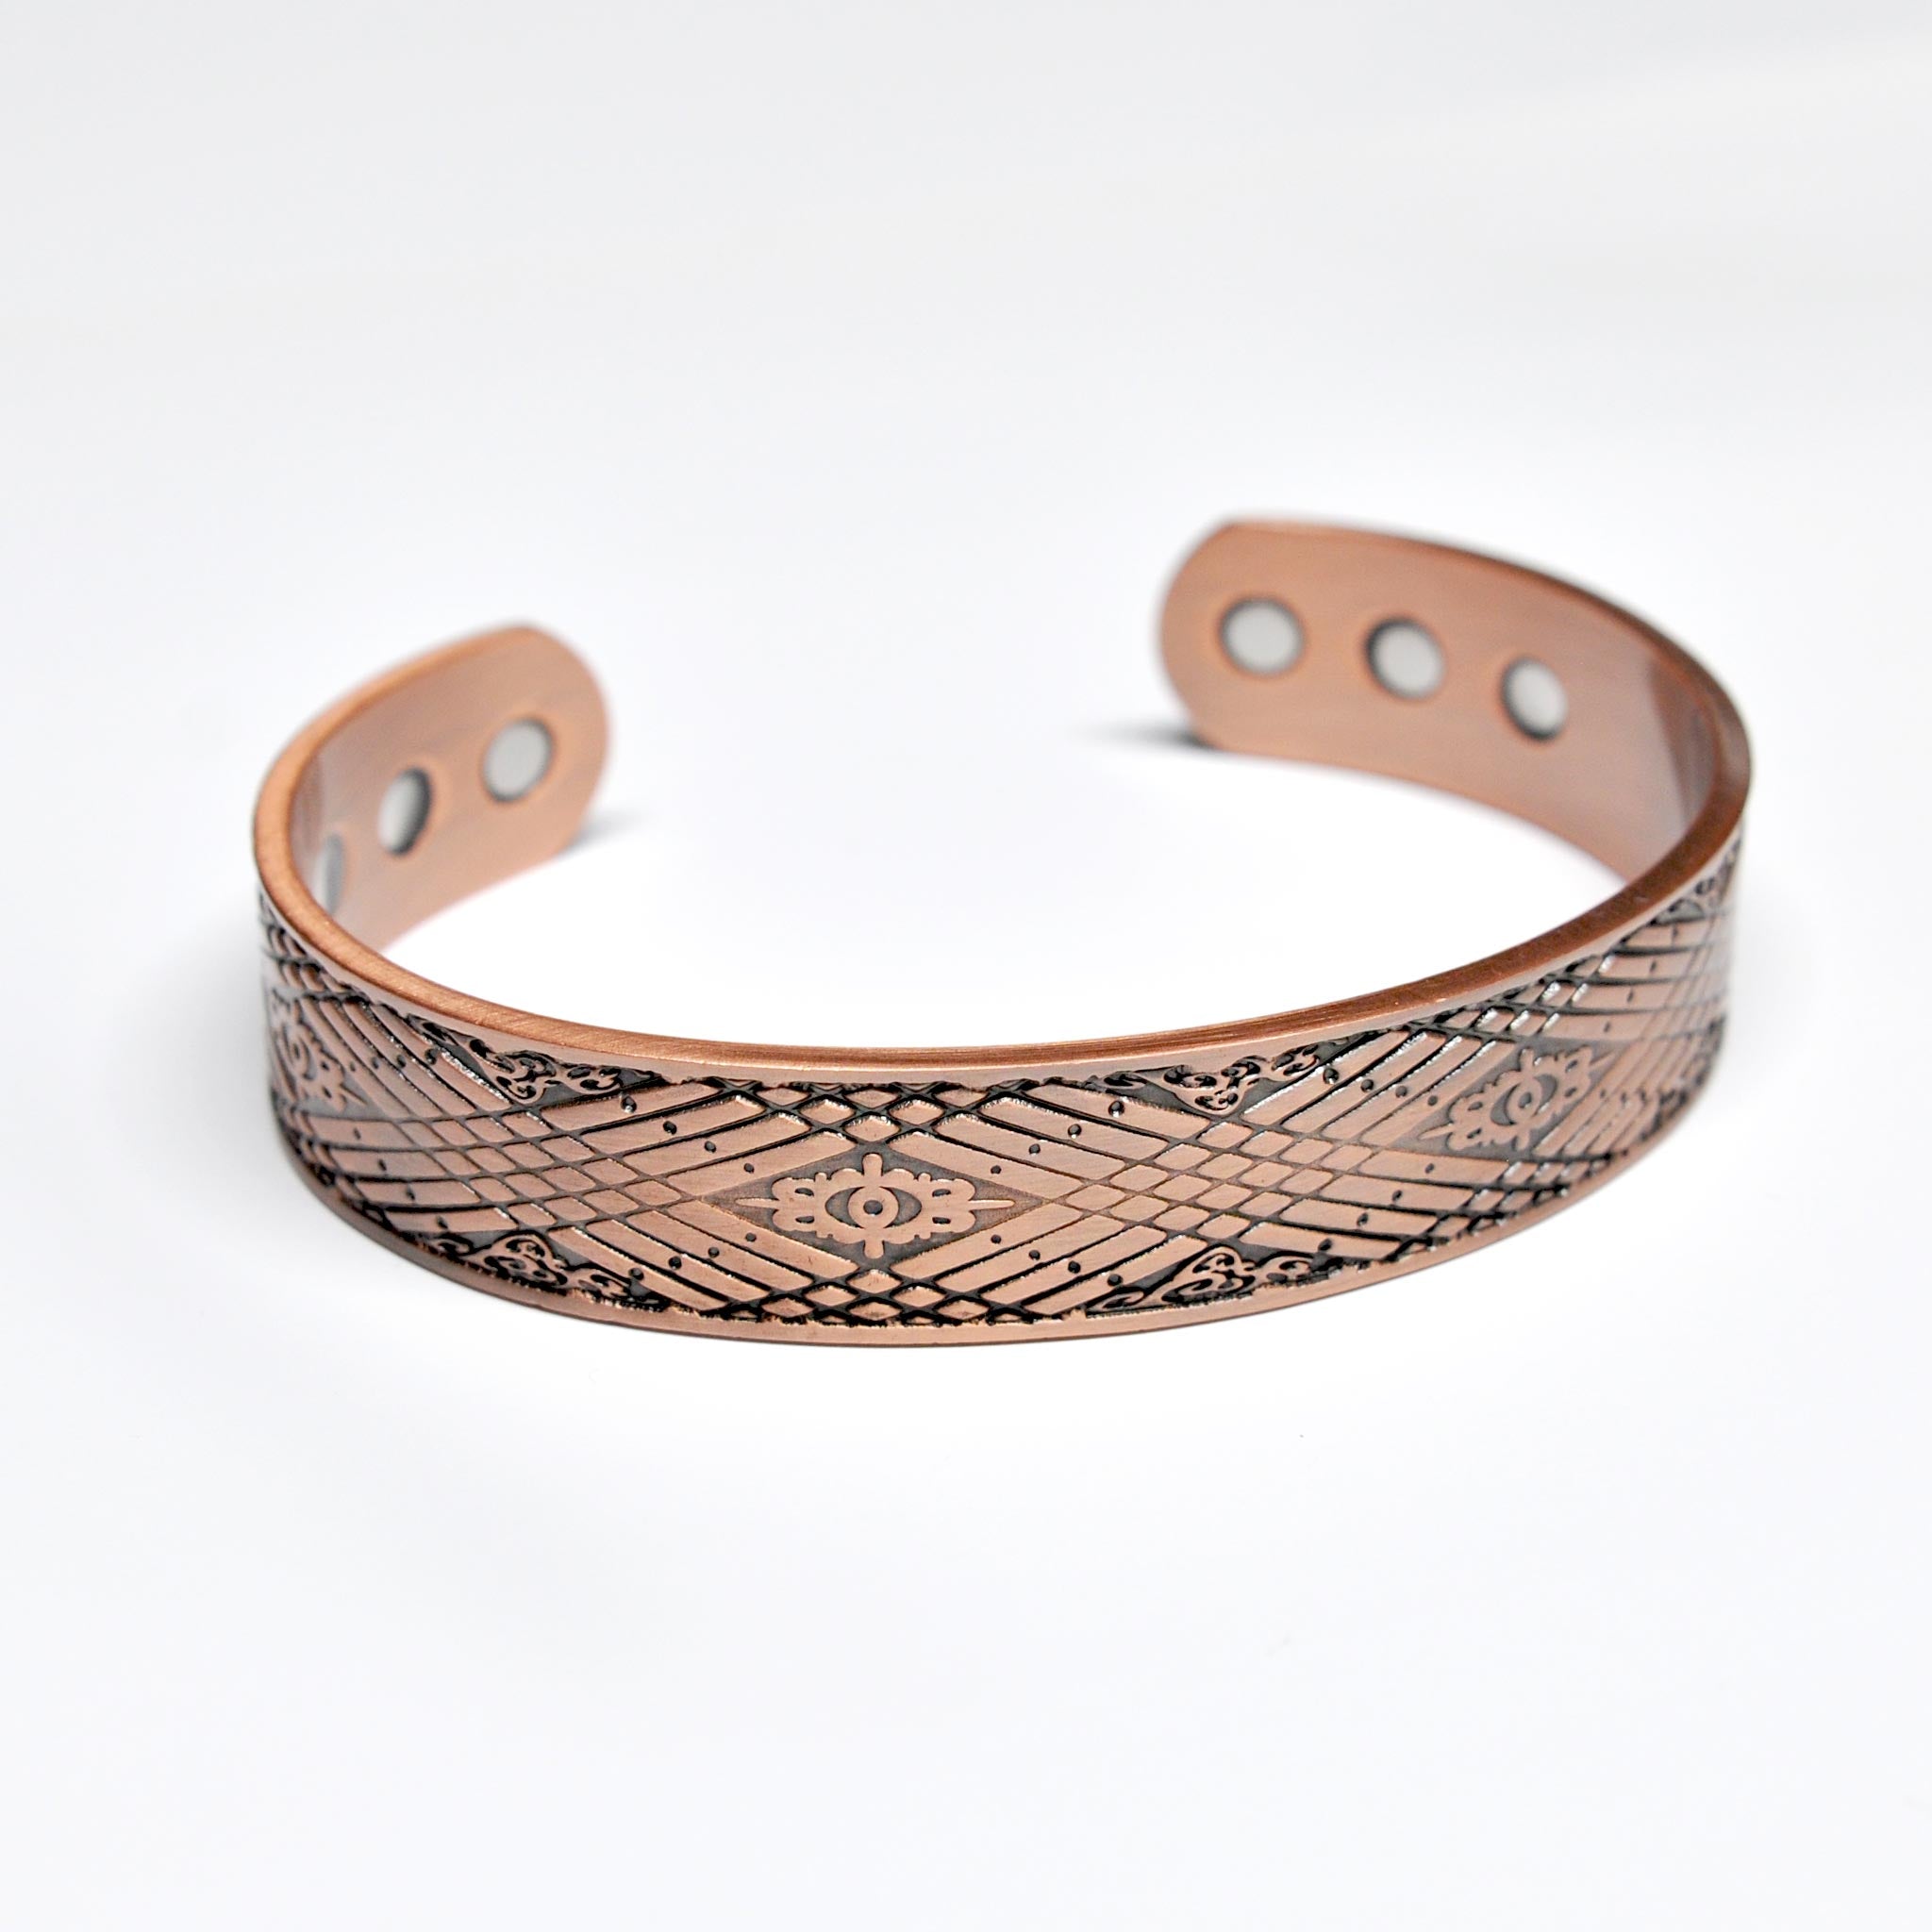  Copper bracelet with magnets